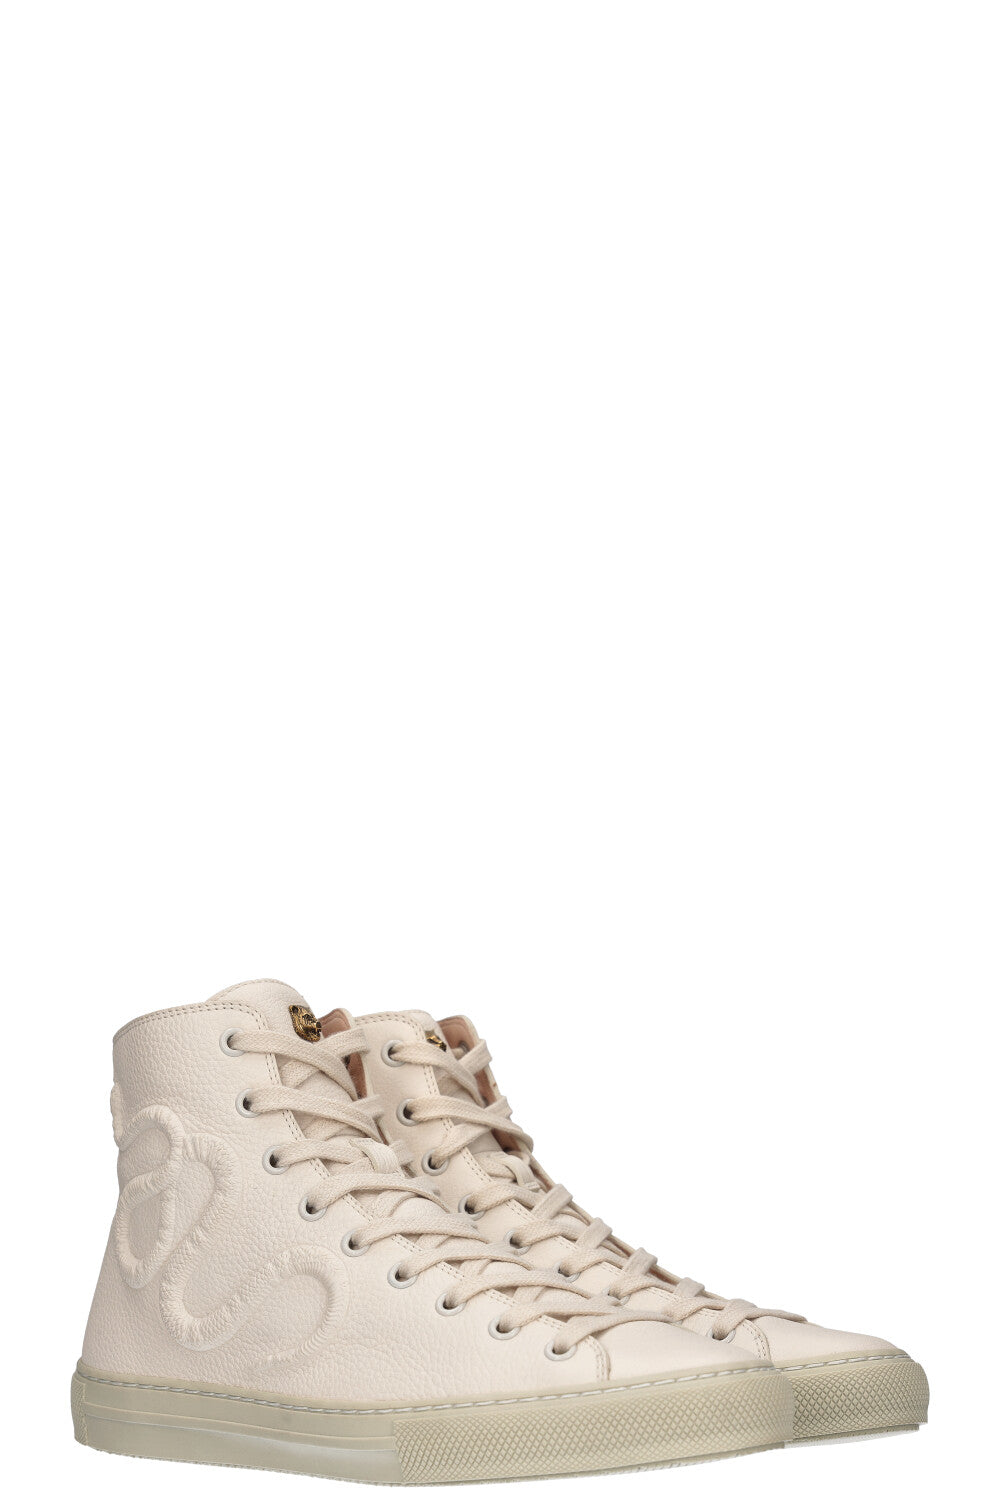 GUCCI High Top Snake Sneakers White